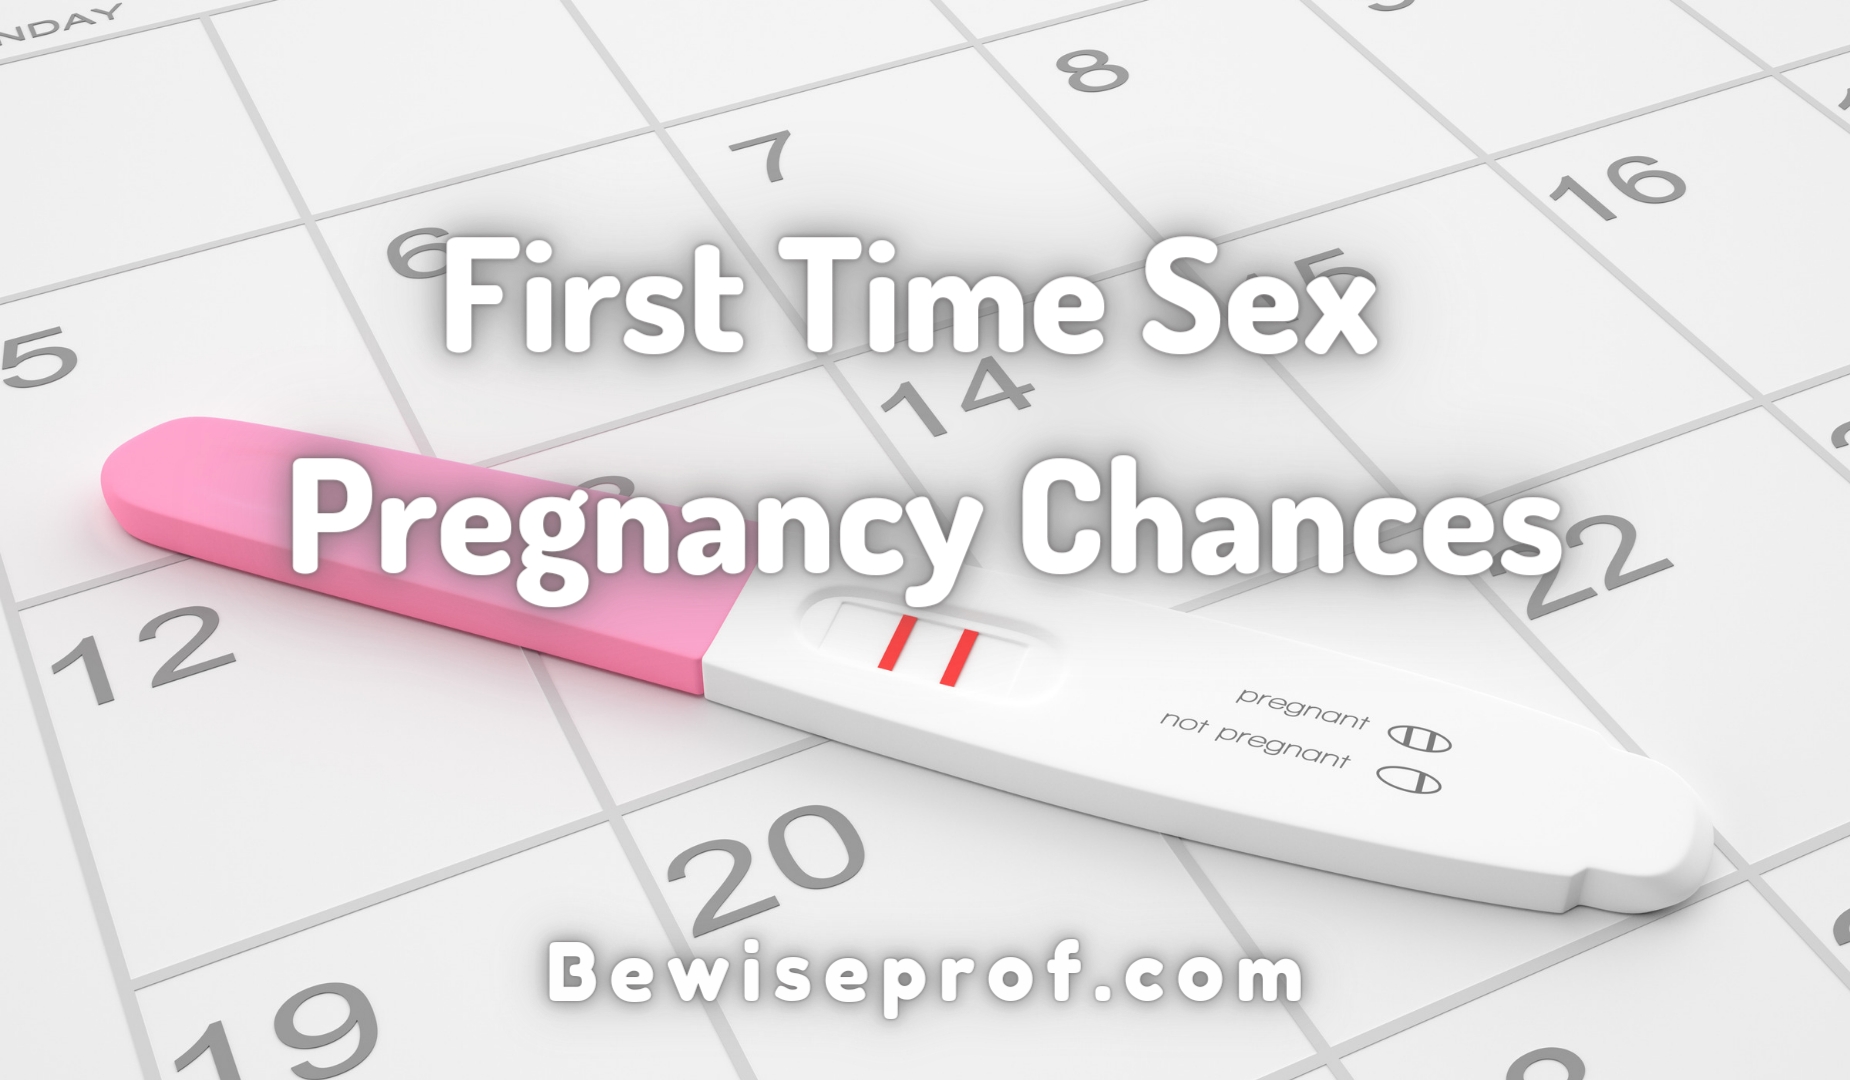 First Time Sex Pregnancy Chances